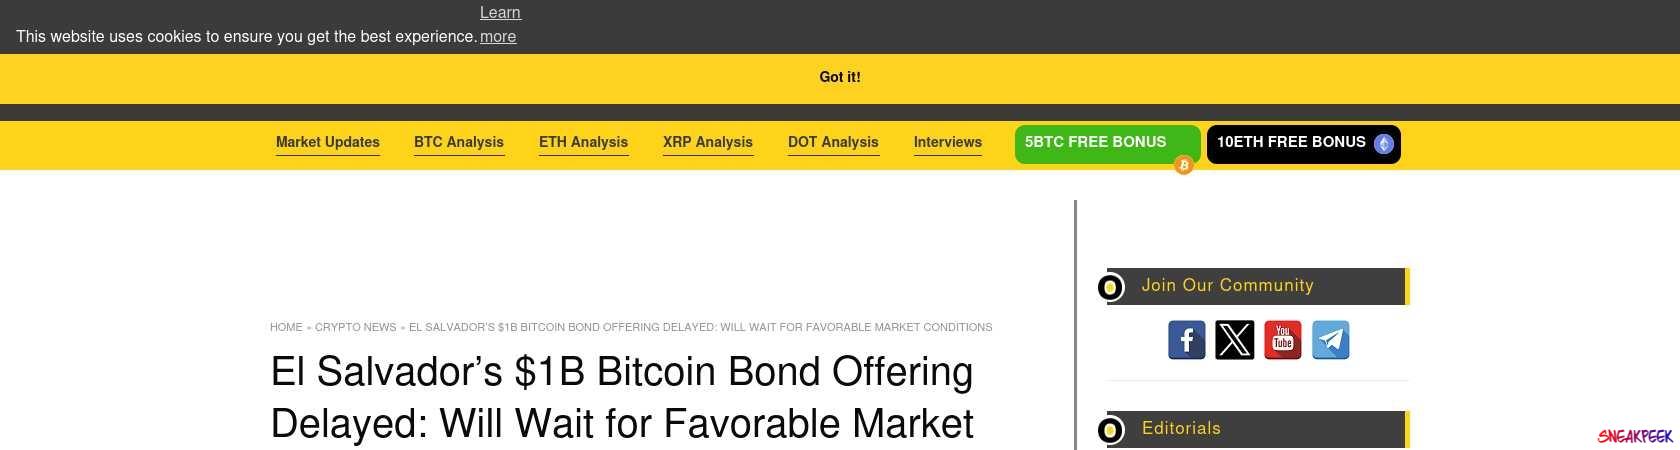 Read the full Article:  ⭲ El Salvador’s $1B Bitcoin Bond Offering Delayed: Will Wait for Favorable Market Conditions